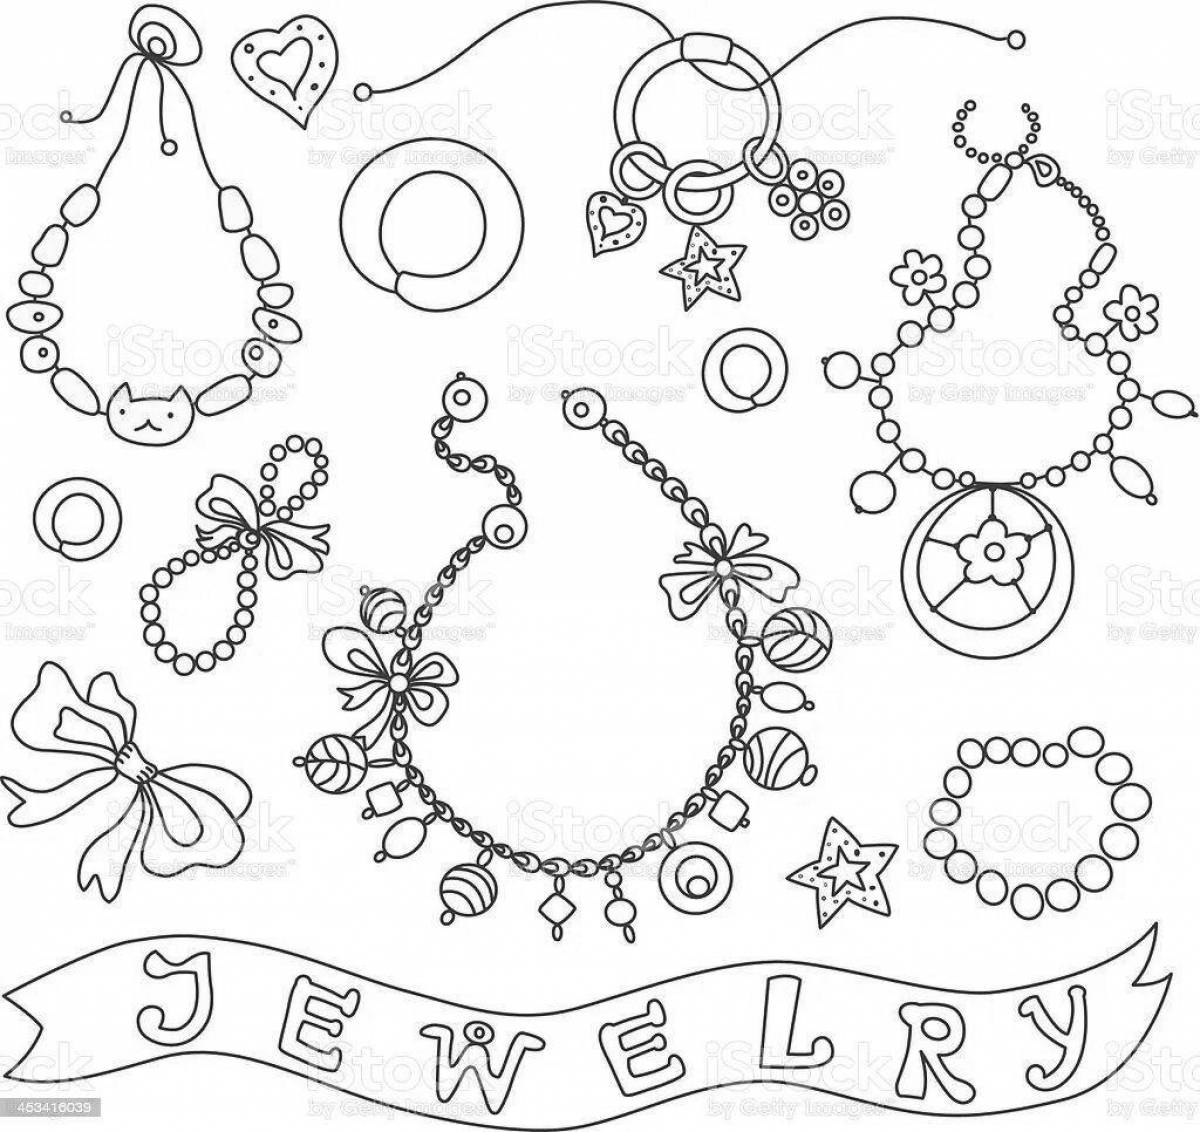 Great coloring pages for kids